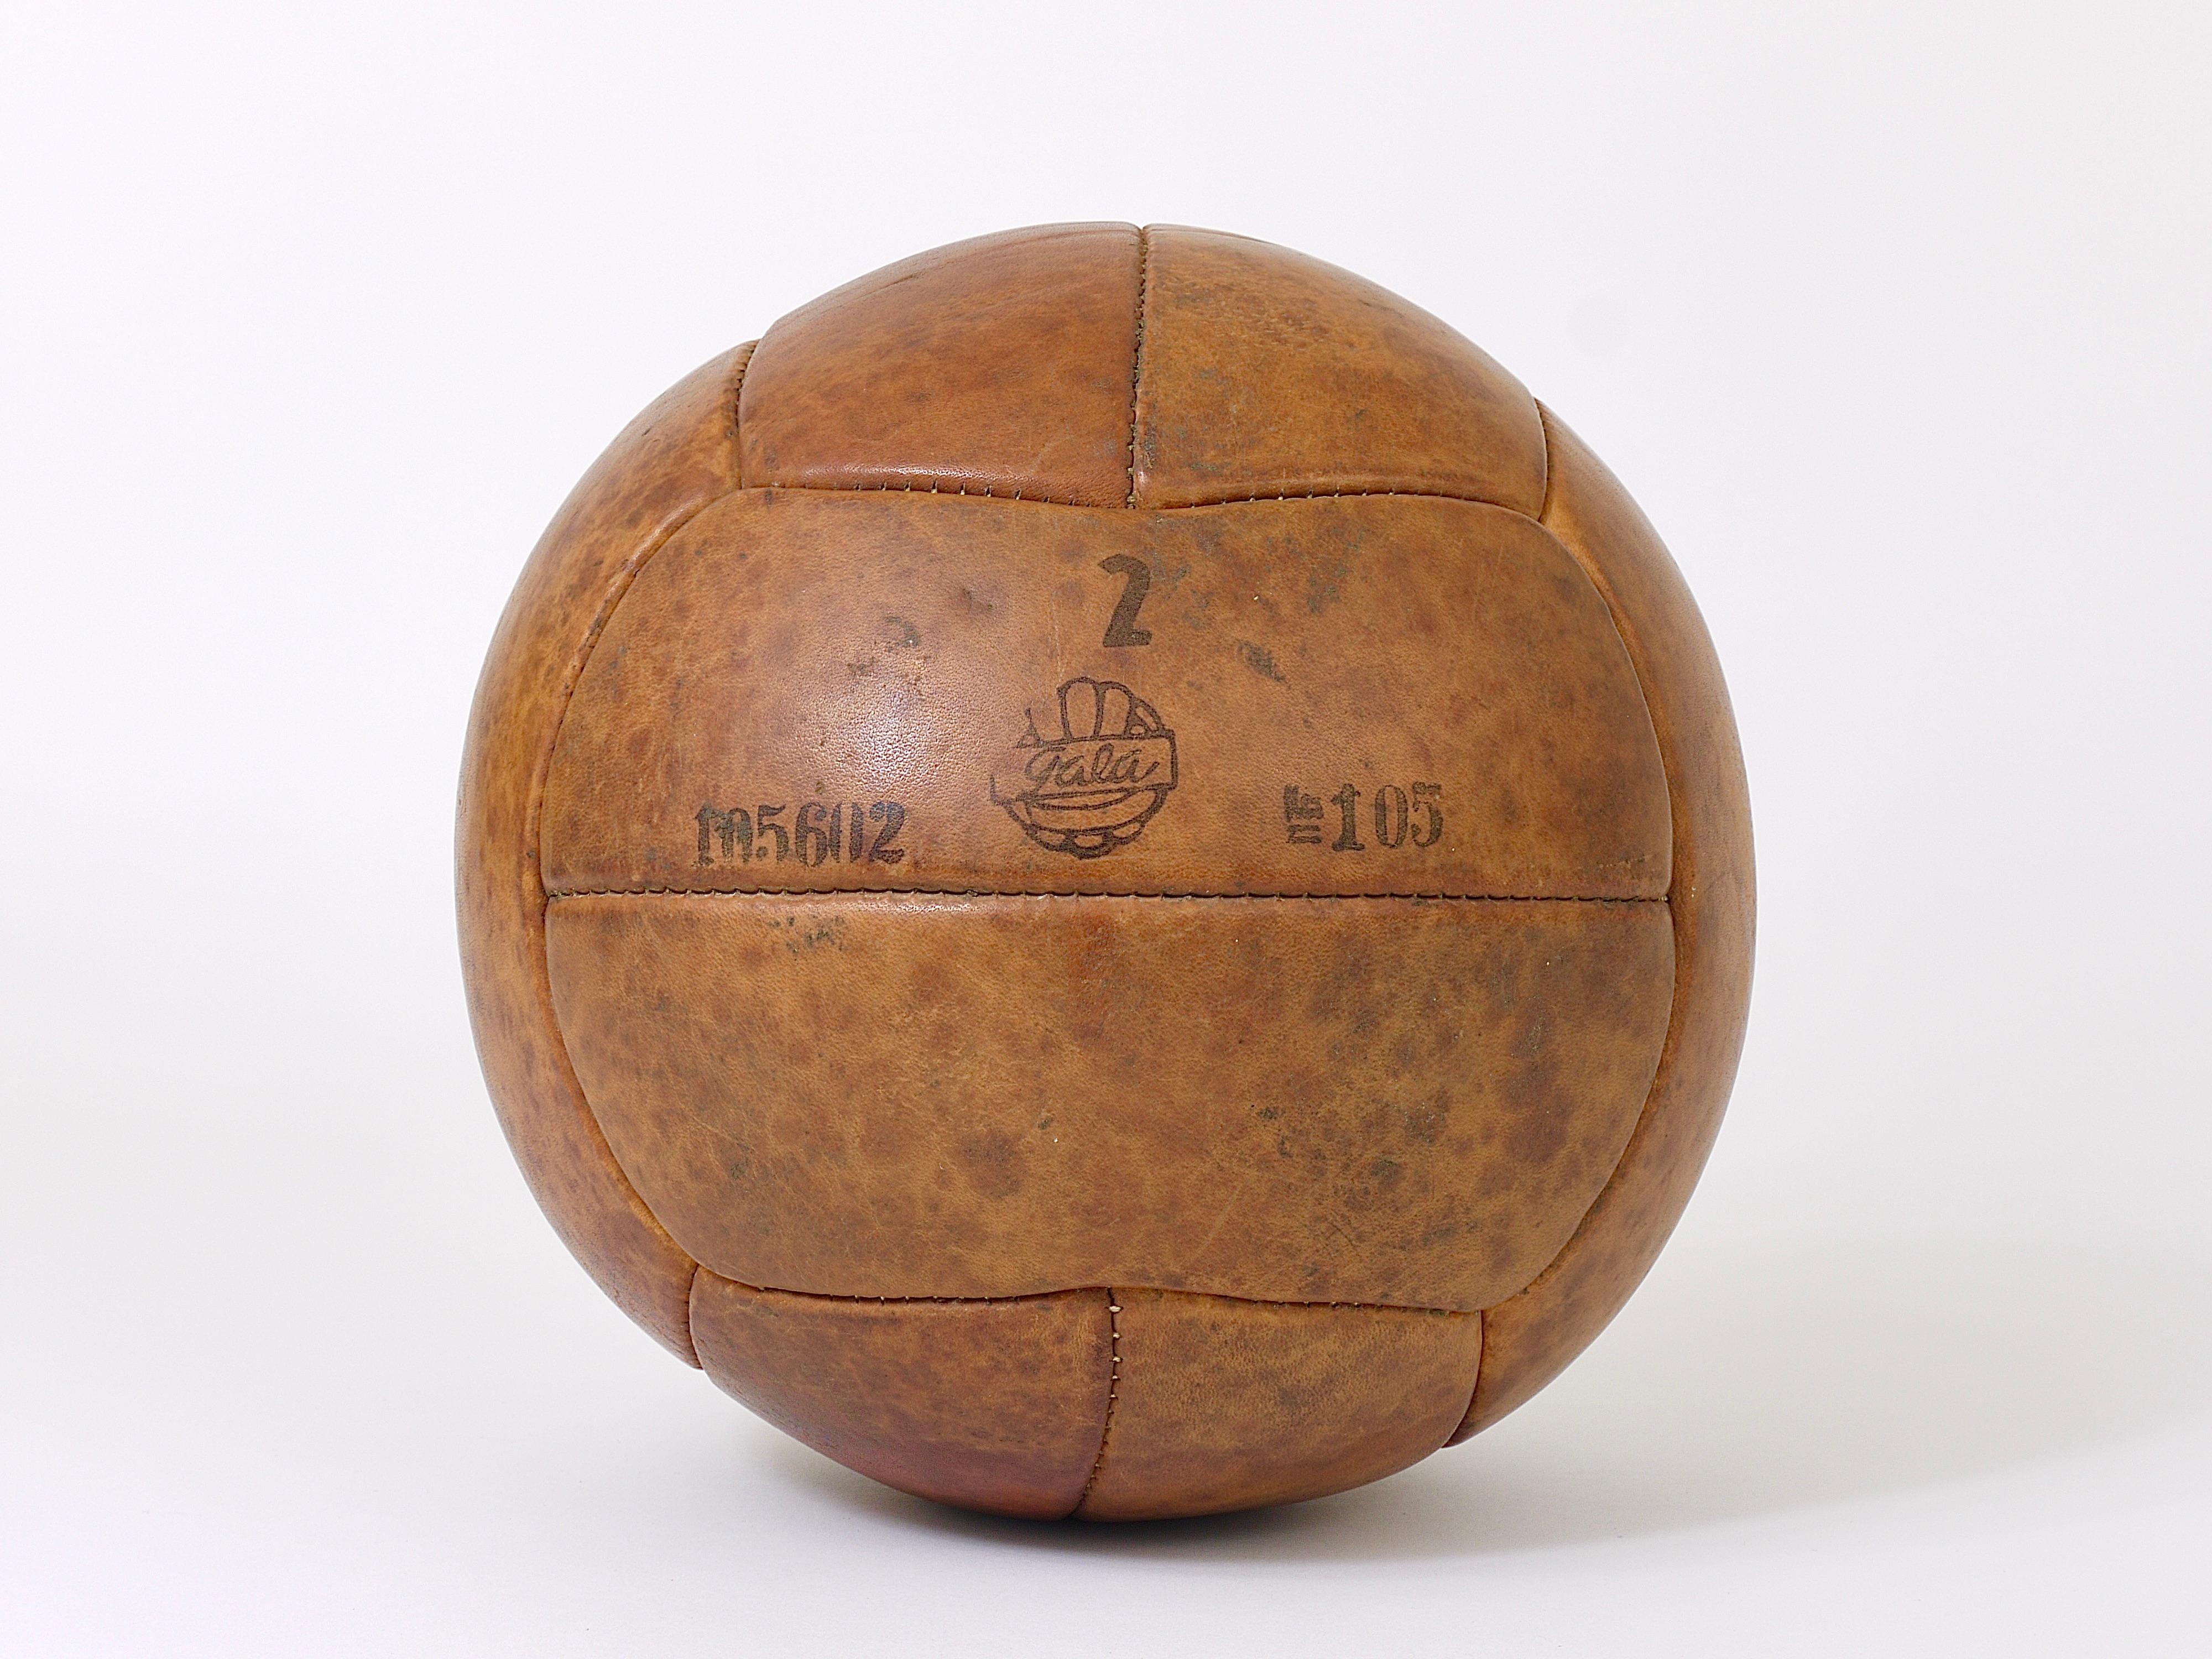 Mid-20th Century Vintage 1930s Tan Leather Medicine Ball from a Gym, Czech Republic, 1930s